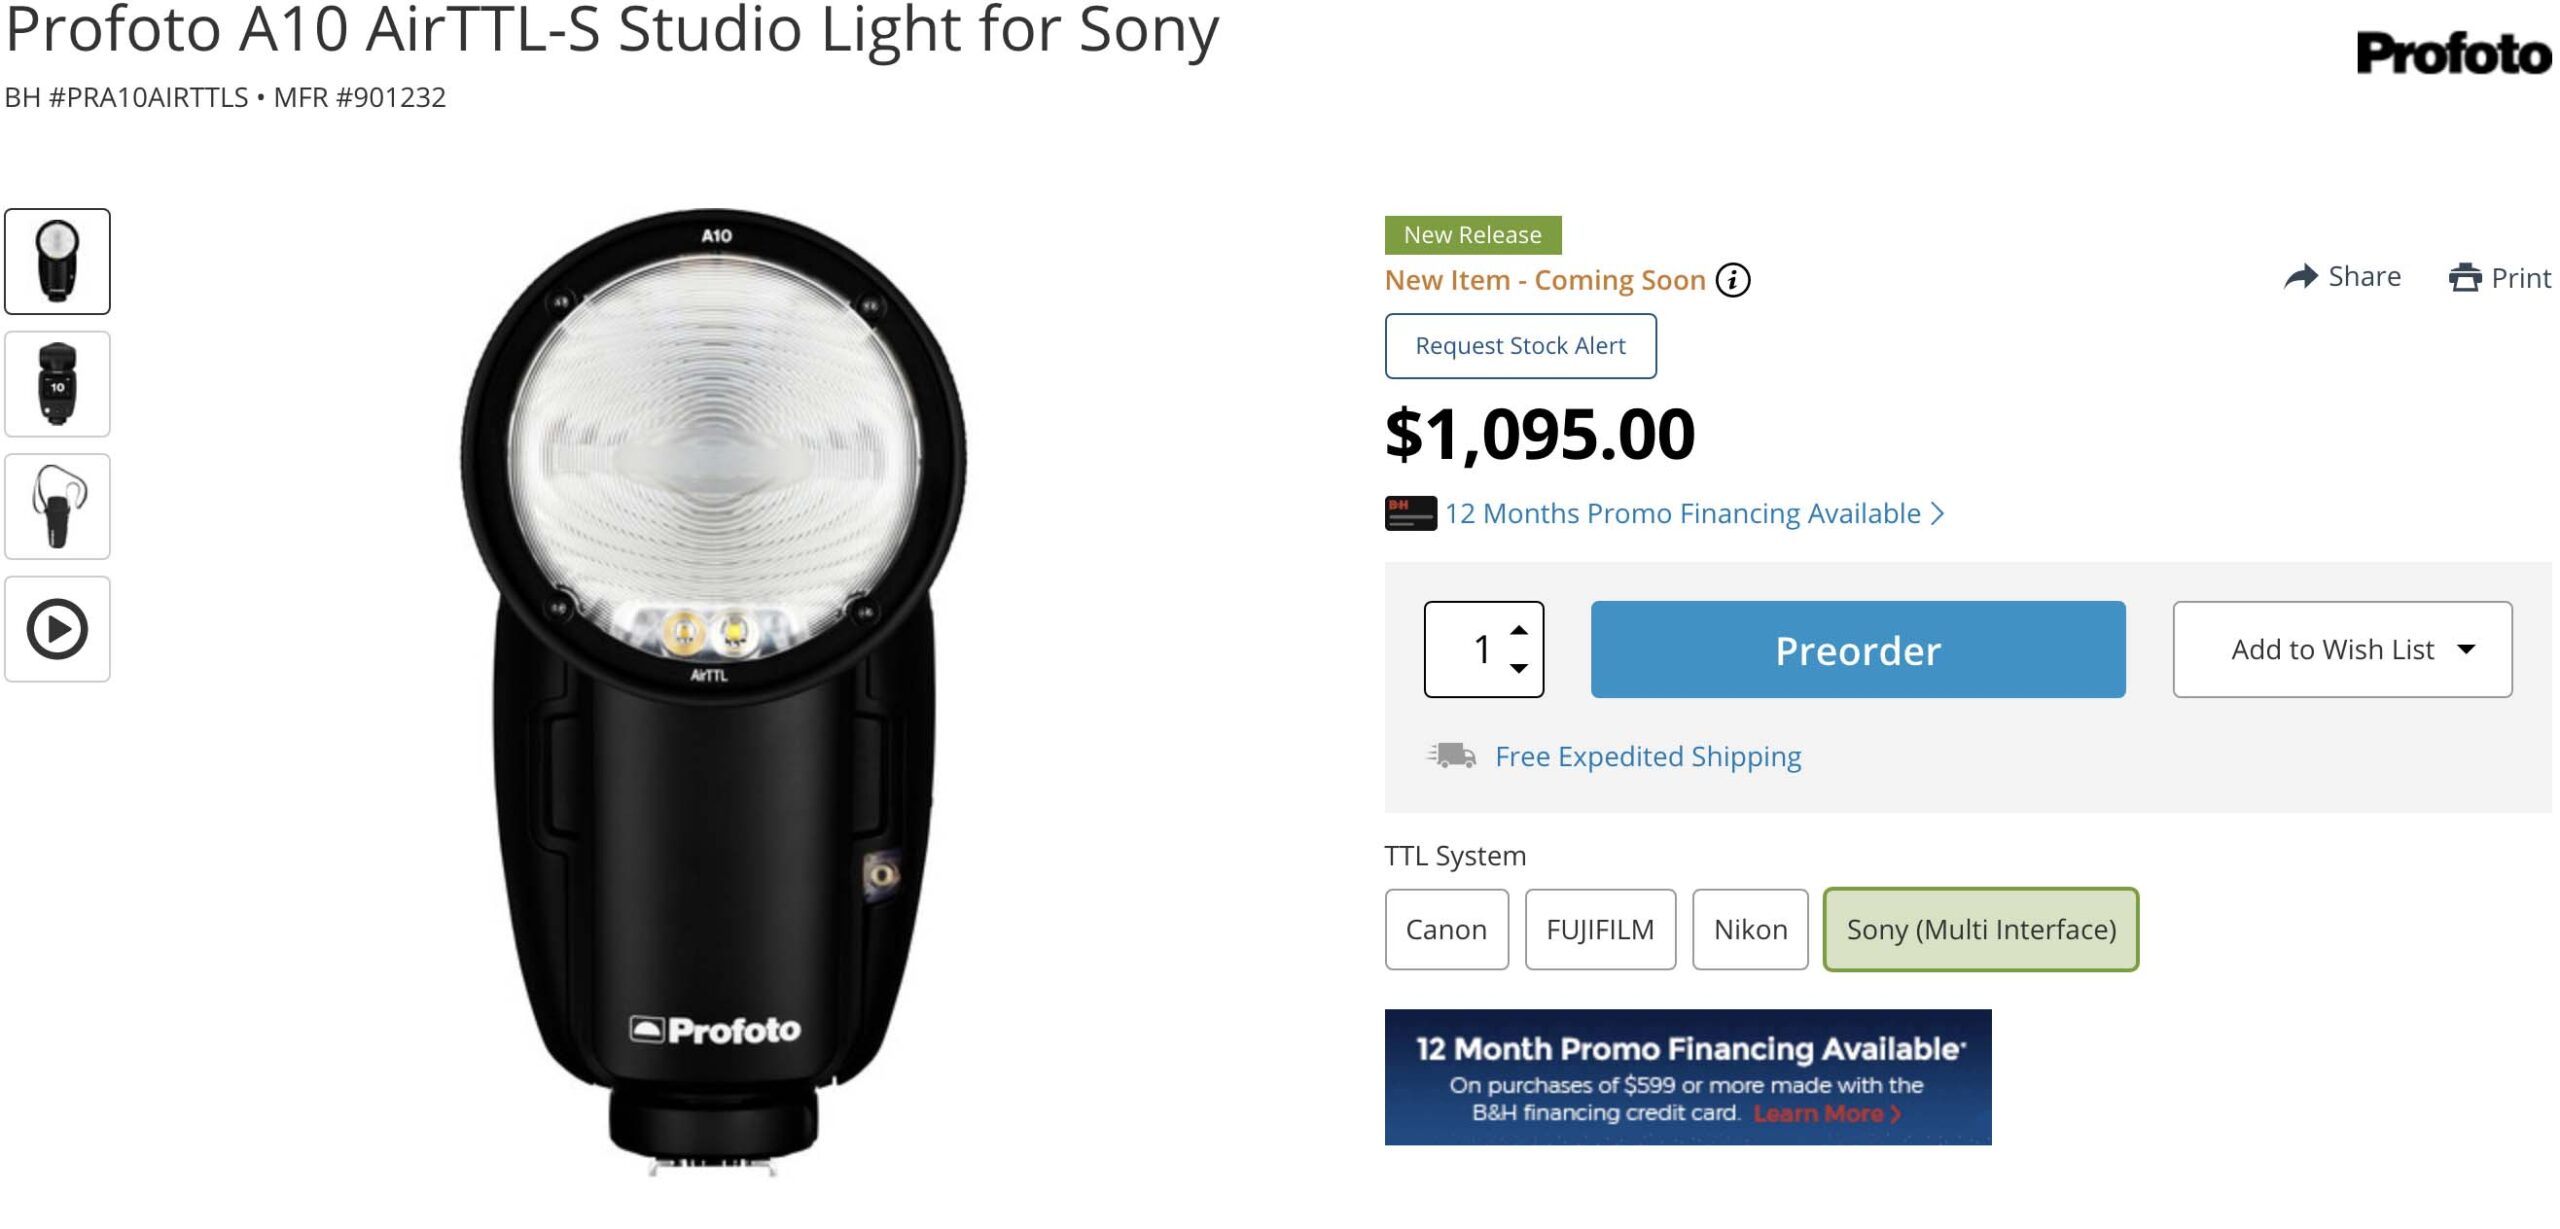 New Profoto A10 AirTTL-S Studio Light For Sony With Bluetooth